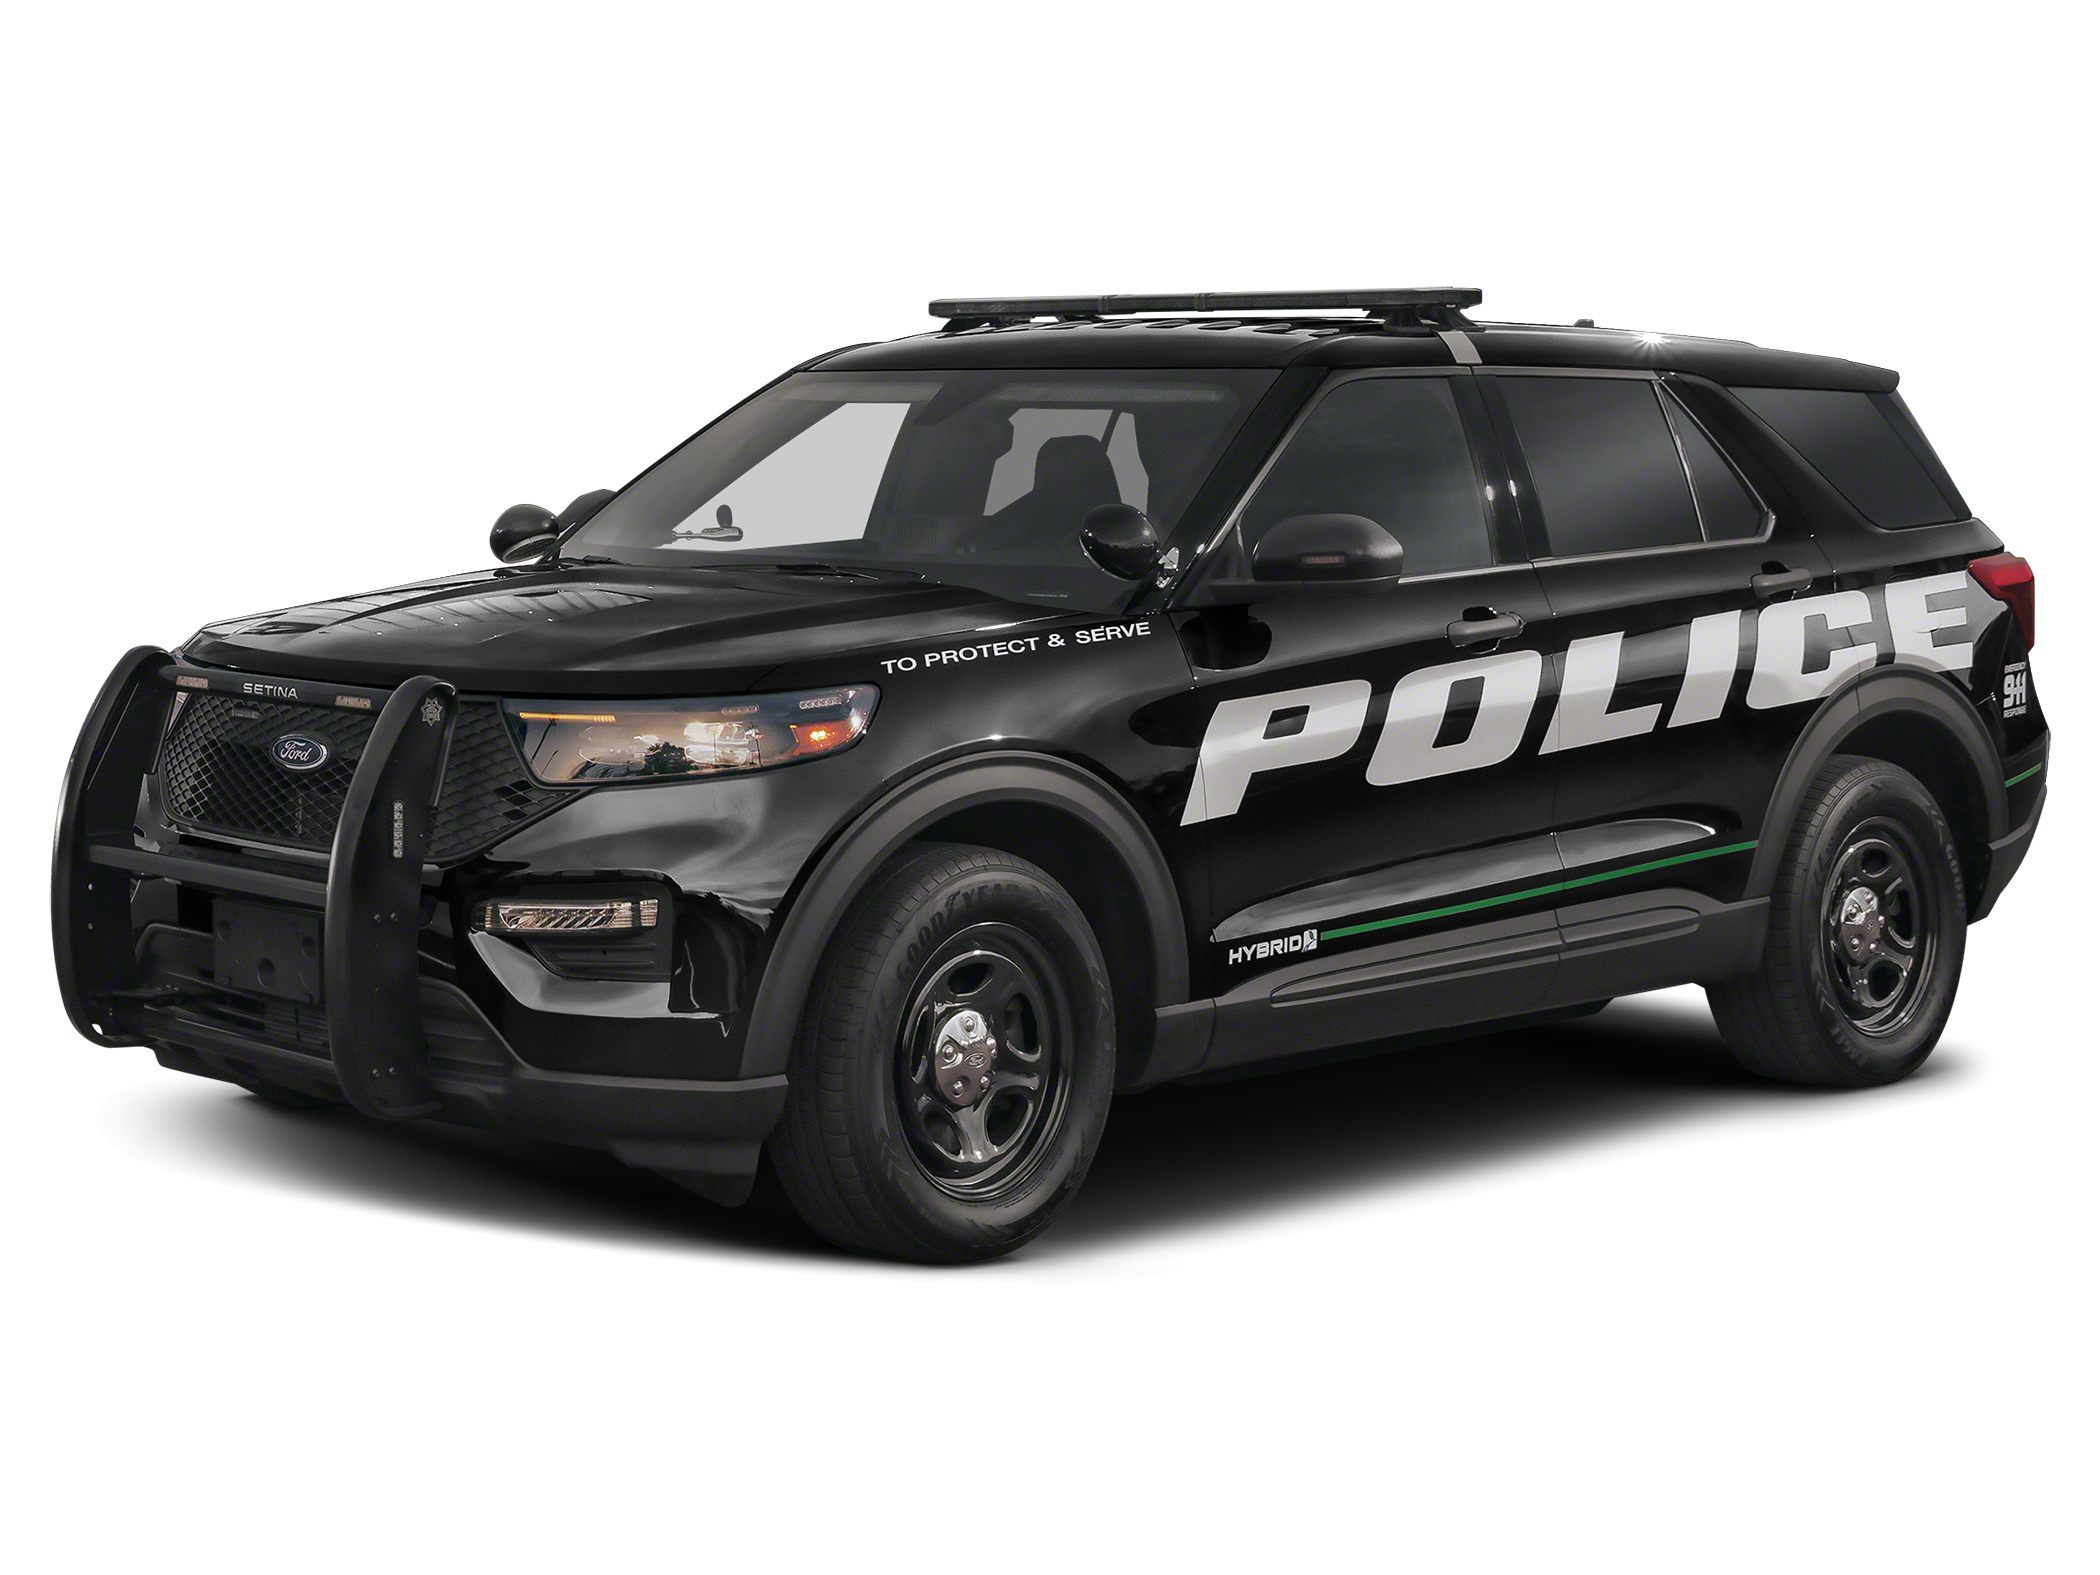 New Police Cars For Sale Upfitted with Emergency Lights, Vehicle Equipment